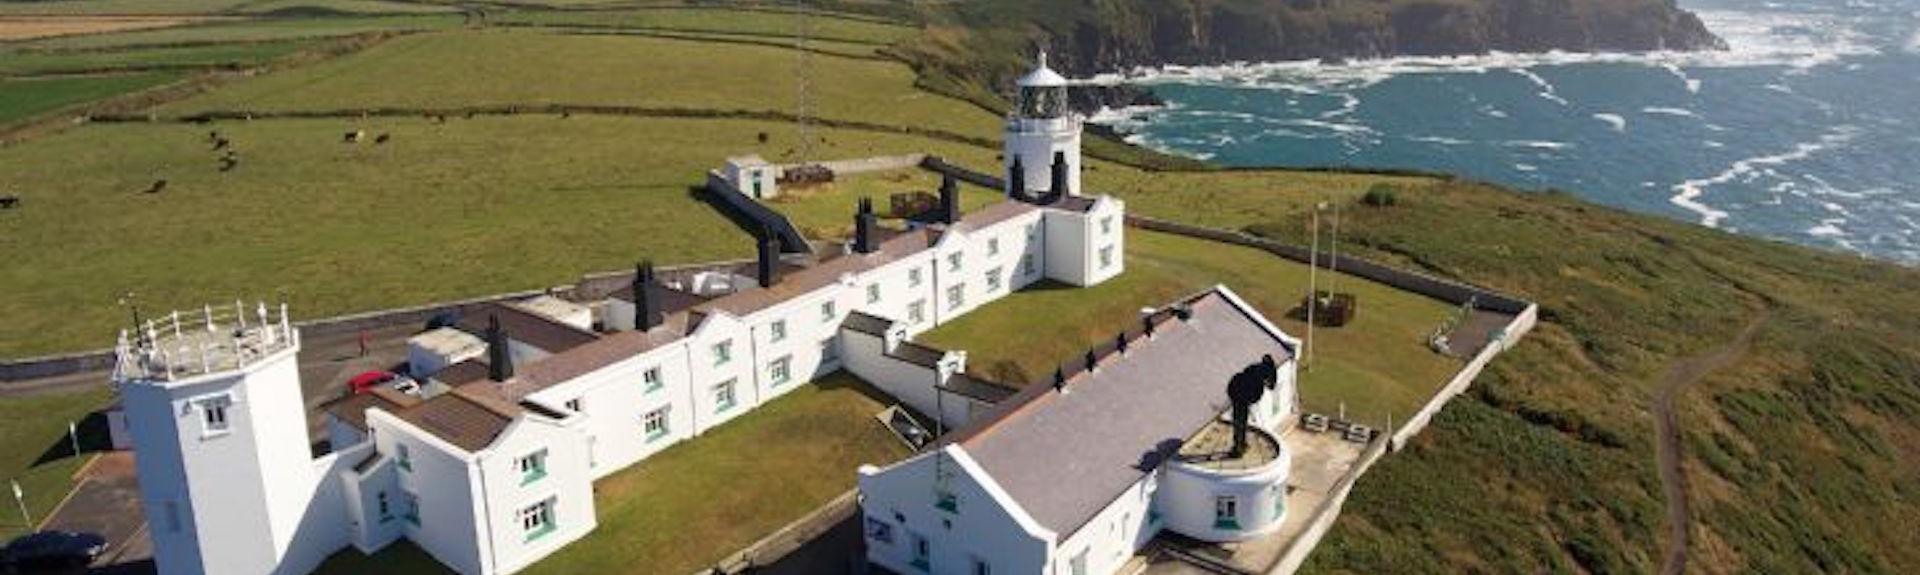 A lighthouse complex offers clifftop views along the North Cornwall coast.